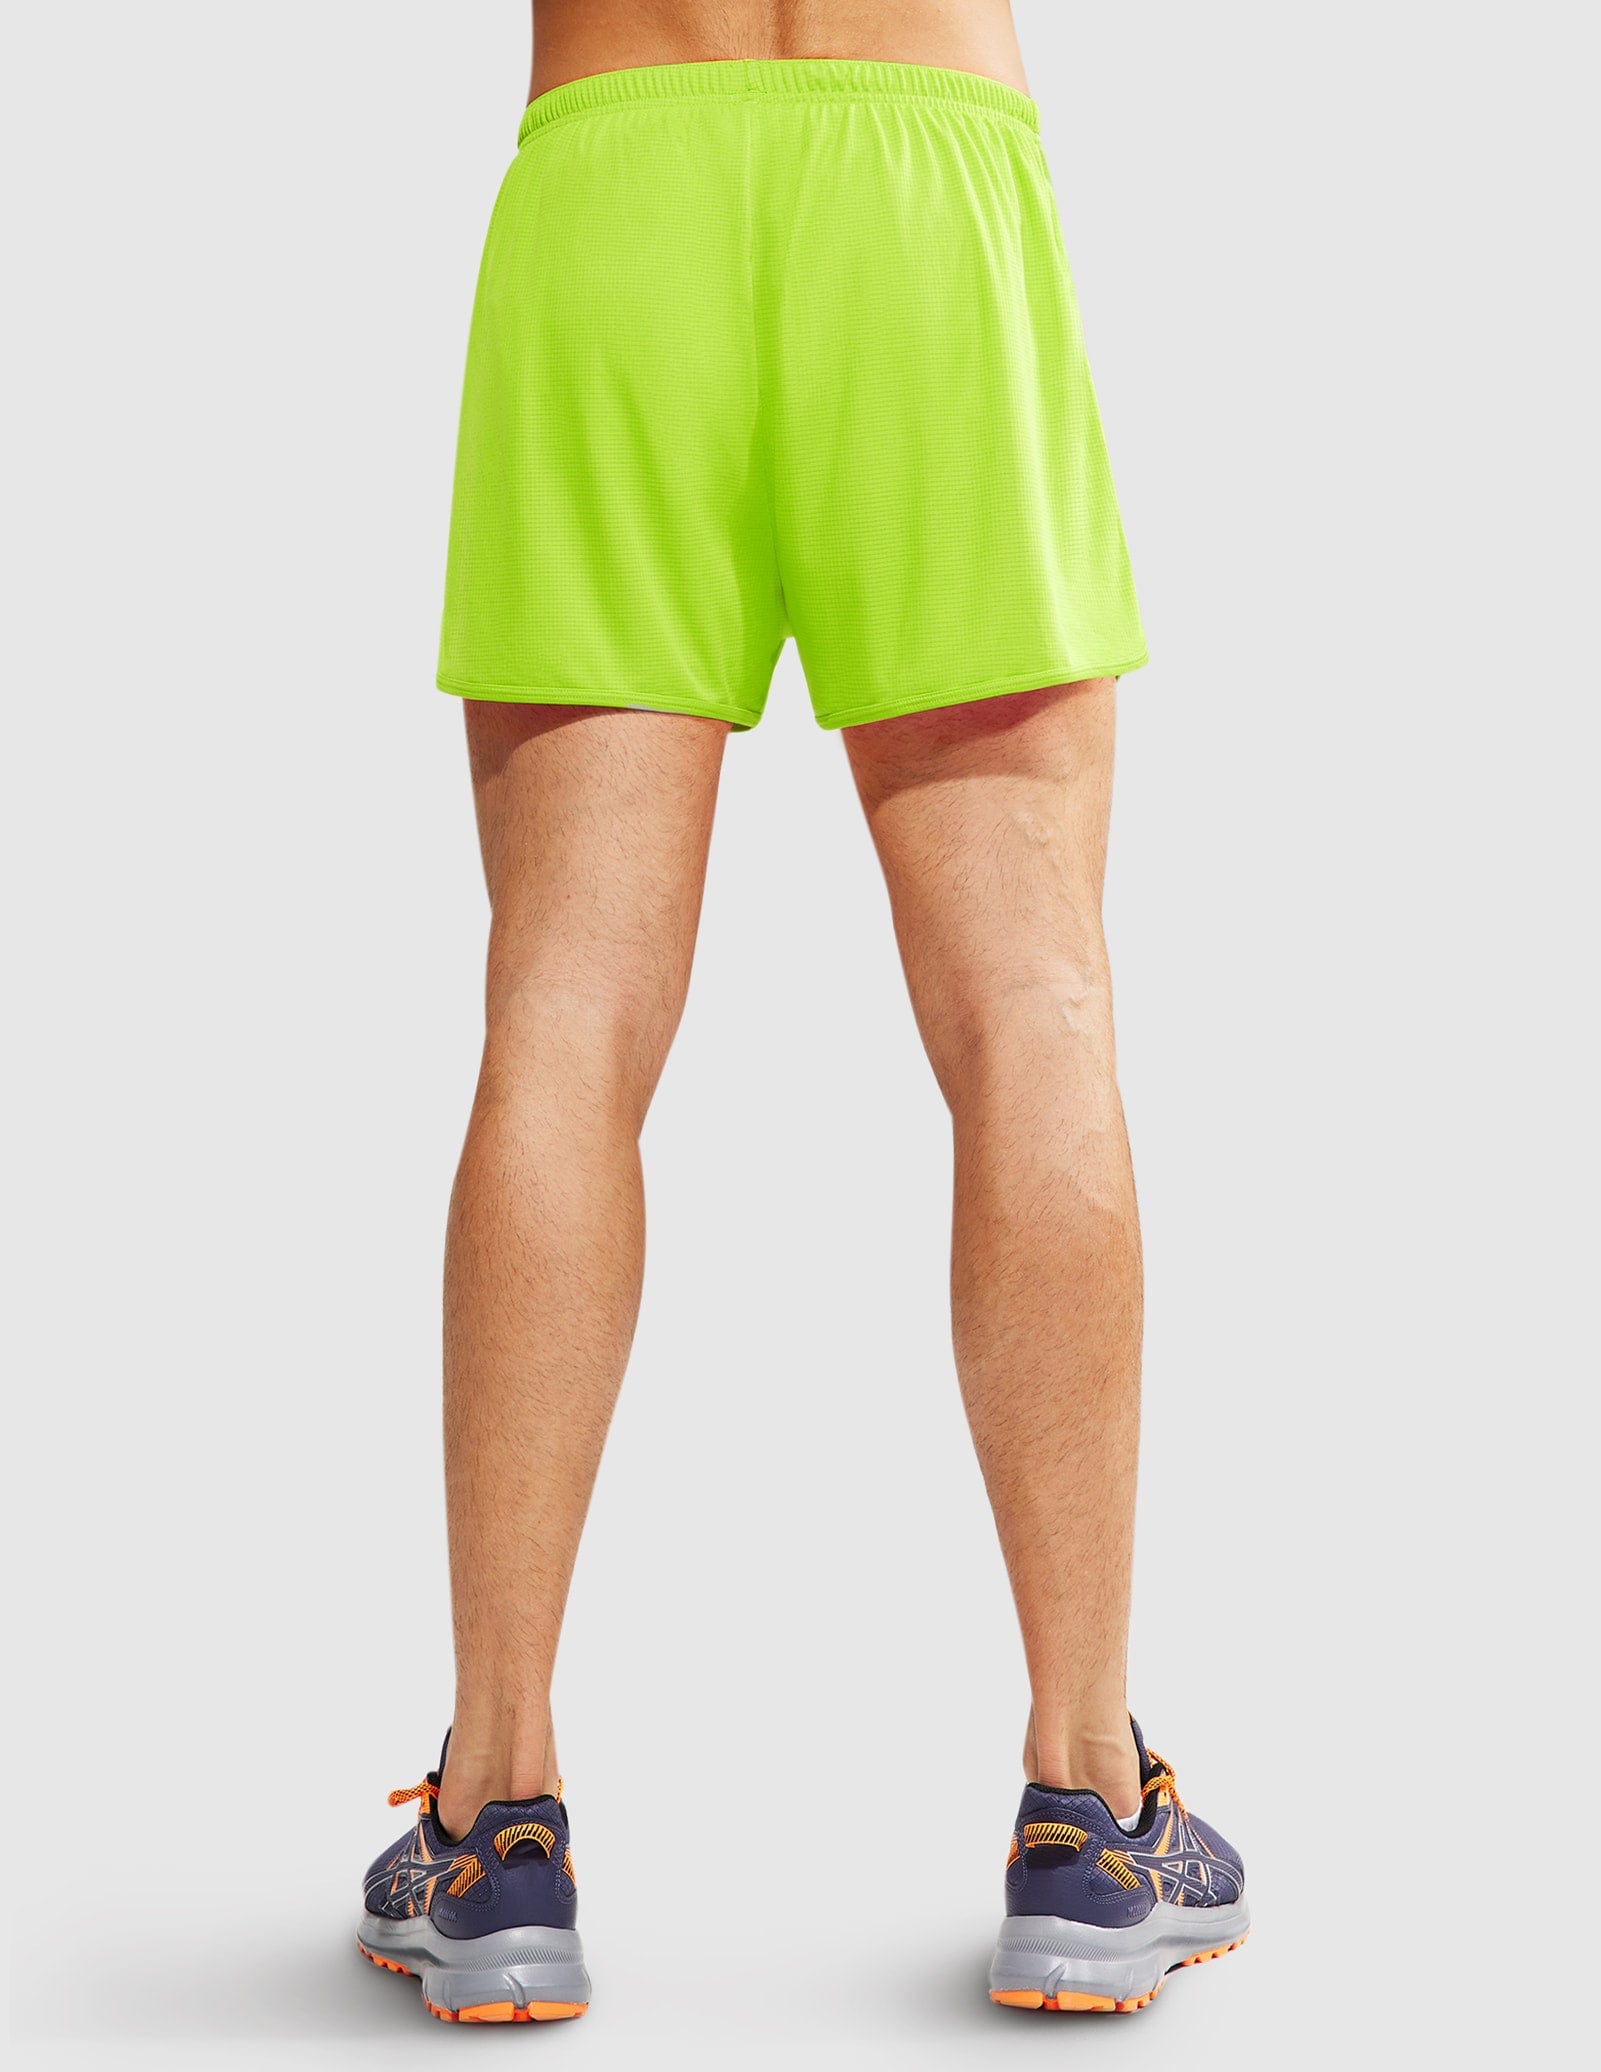 Men's 3-Inch Quick Dry Running Shorts with Liner Men's Shorts MIER